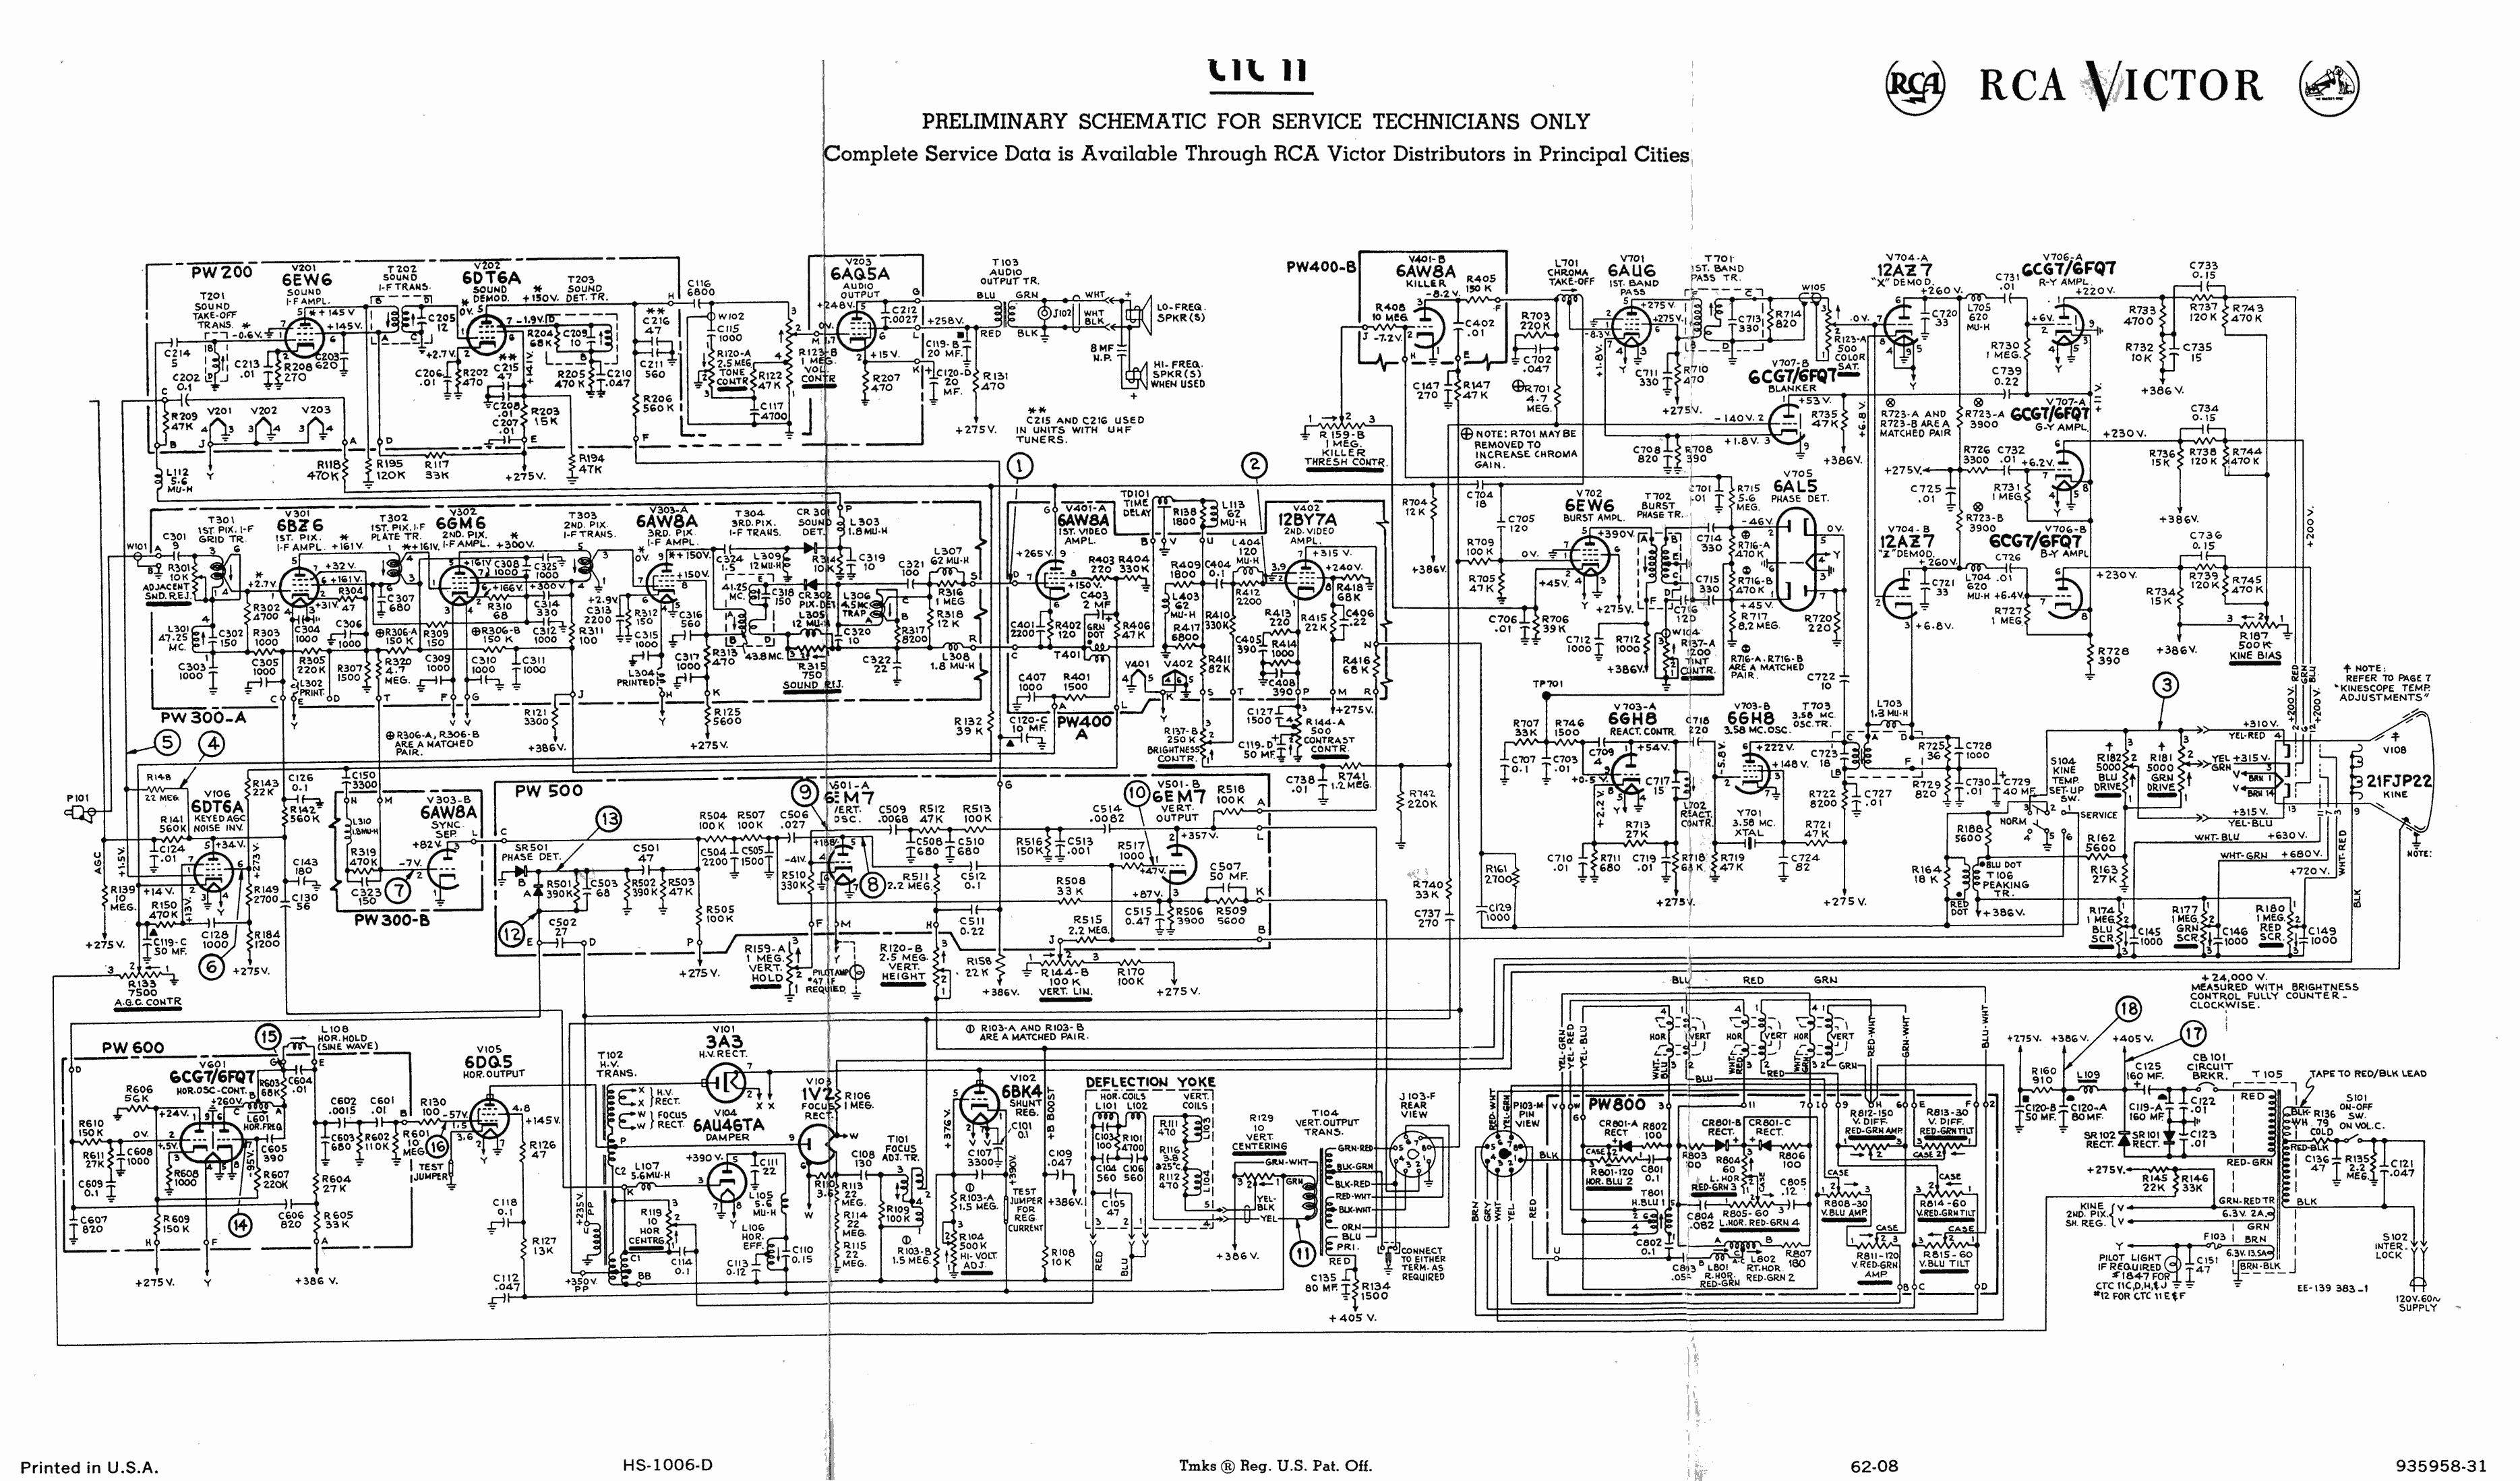 Images of Schematic | 3738x2197